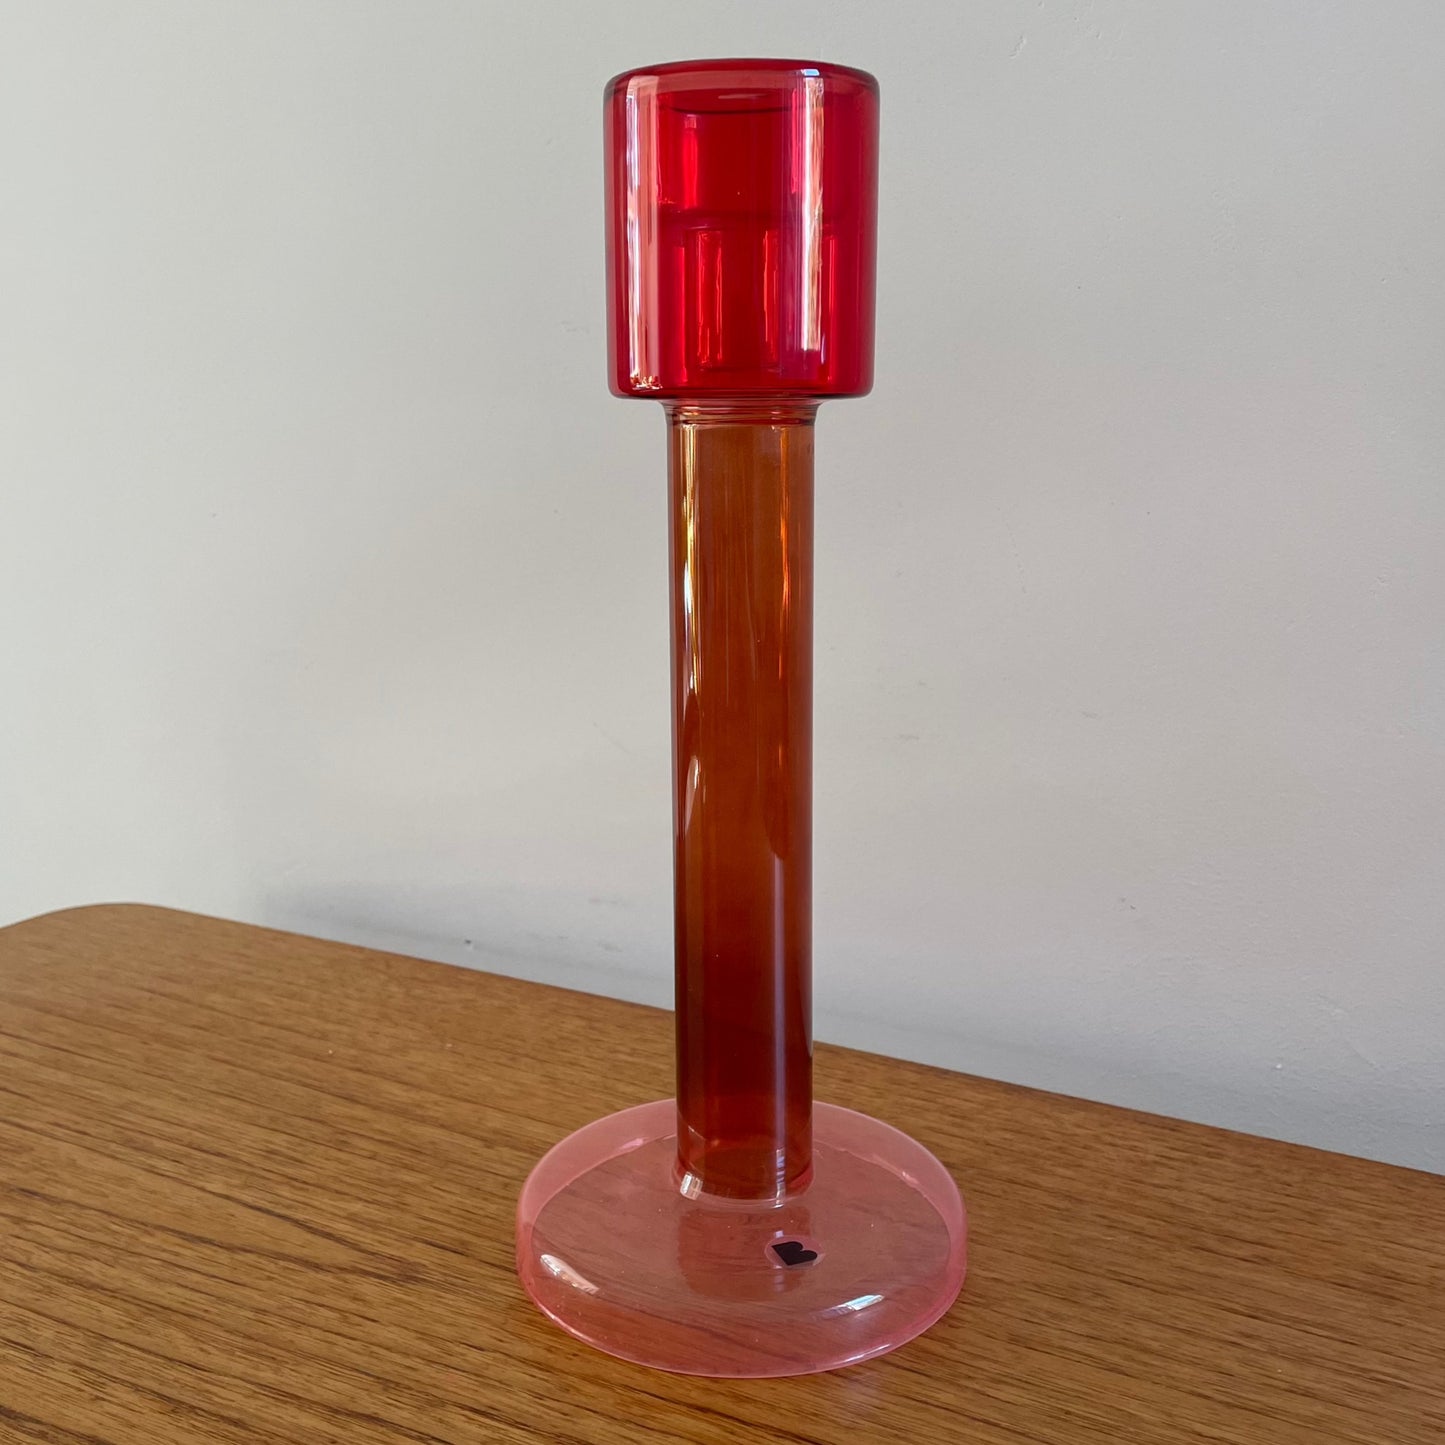 Bole Candleholder Large Red/Pink - SALE 30% OFF!